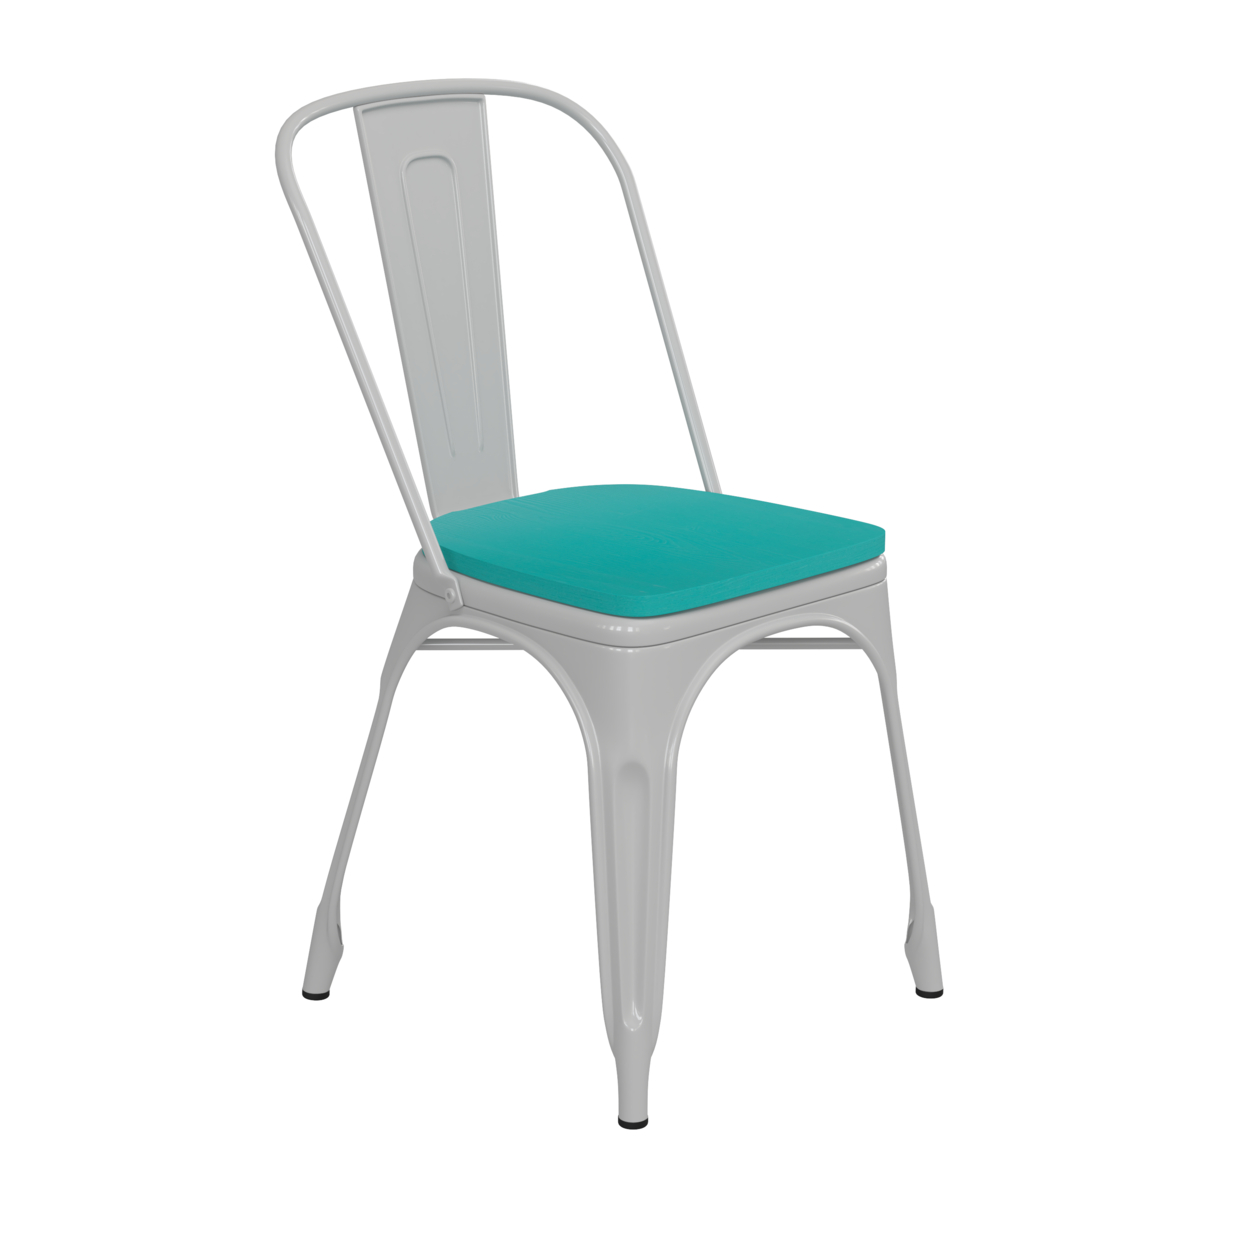 Metal Chair, Curved Open Back, Polyresin Sleek Teal Seat, Light Gray